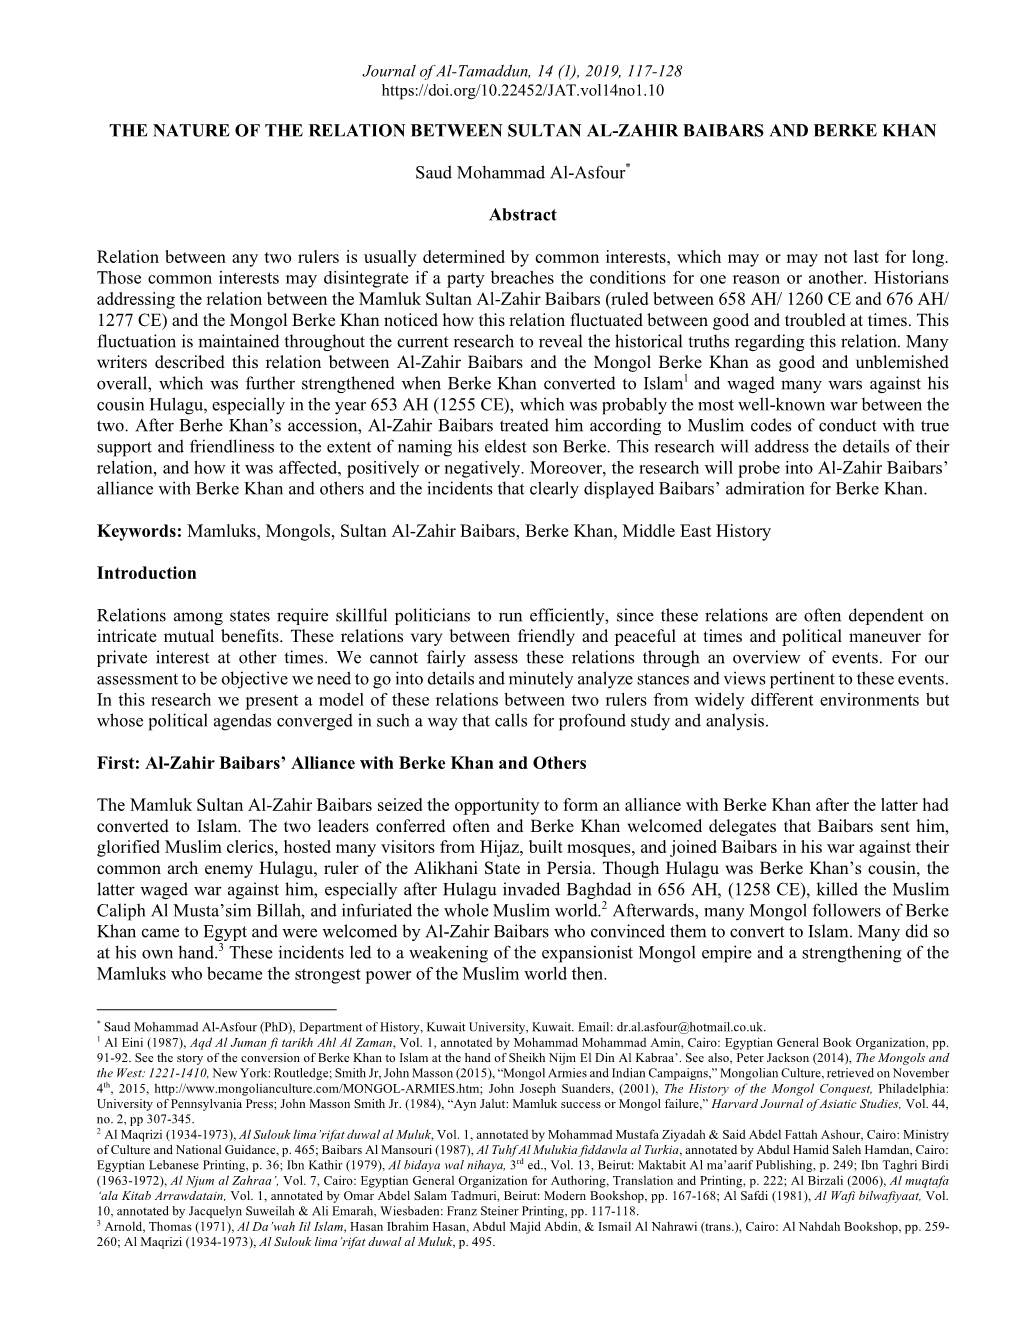 THE NATURE of the RELATION BETWEEN SULTAN AL-ZAHIR BAIBARS and BERKE KHAN Saud Mohammad Al-Asfour* Abstract Relation Between